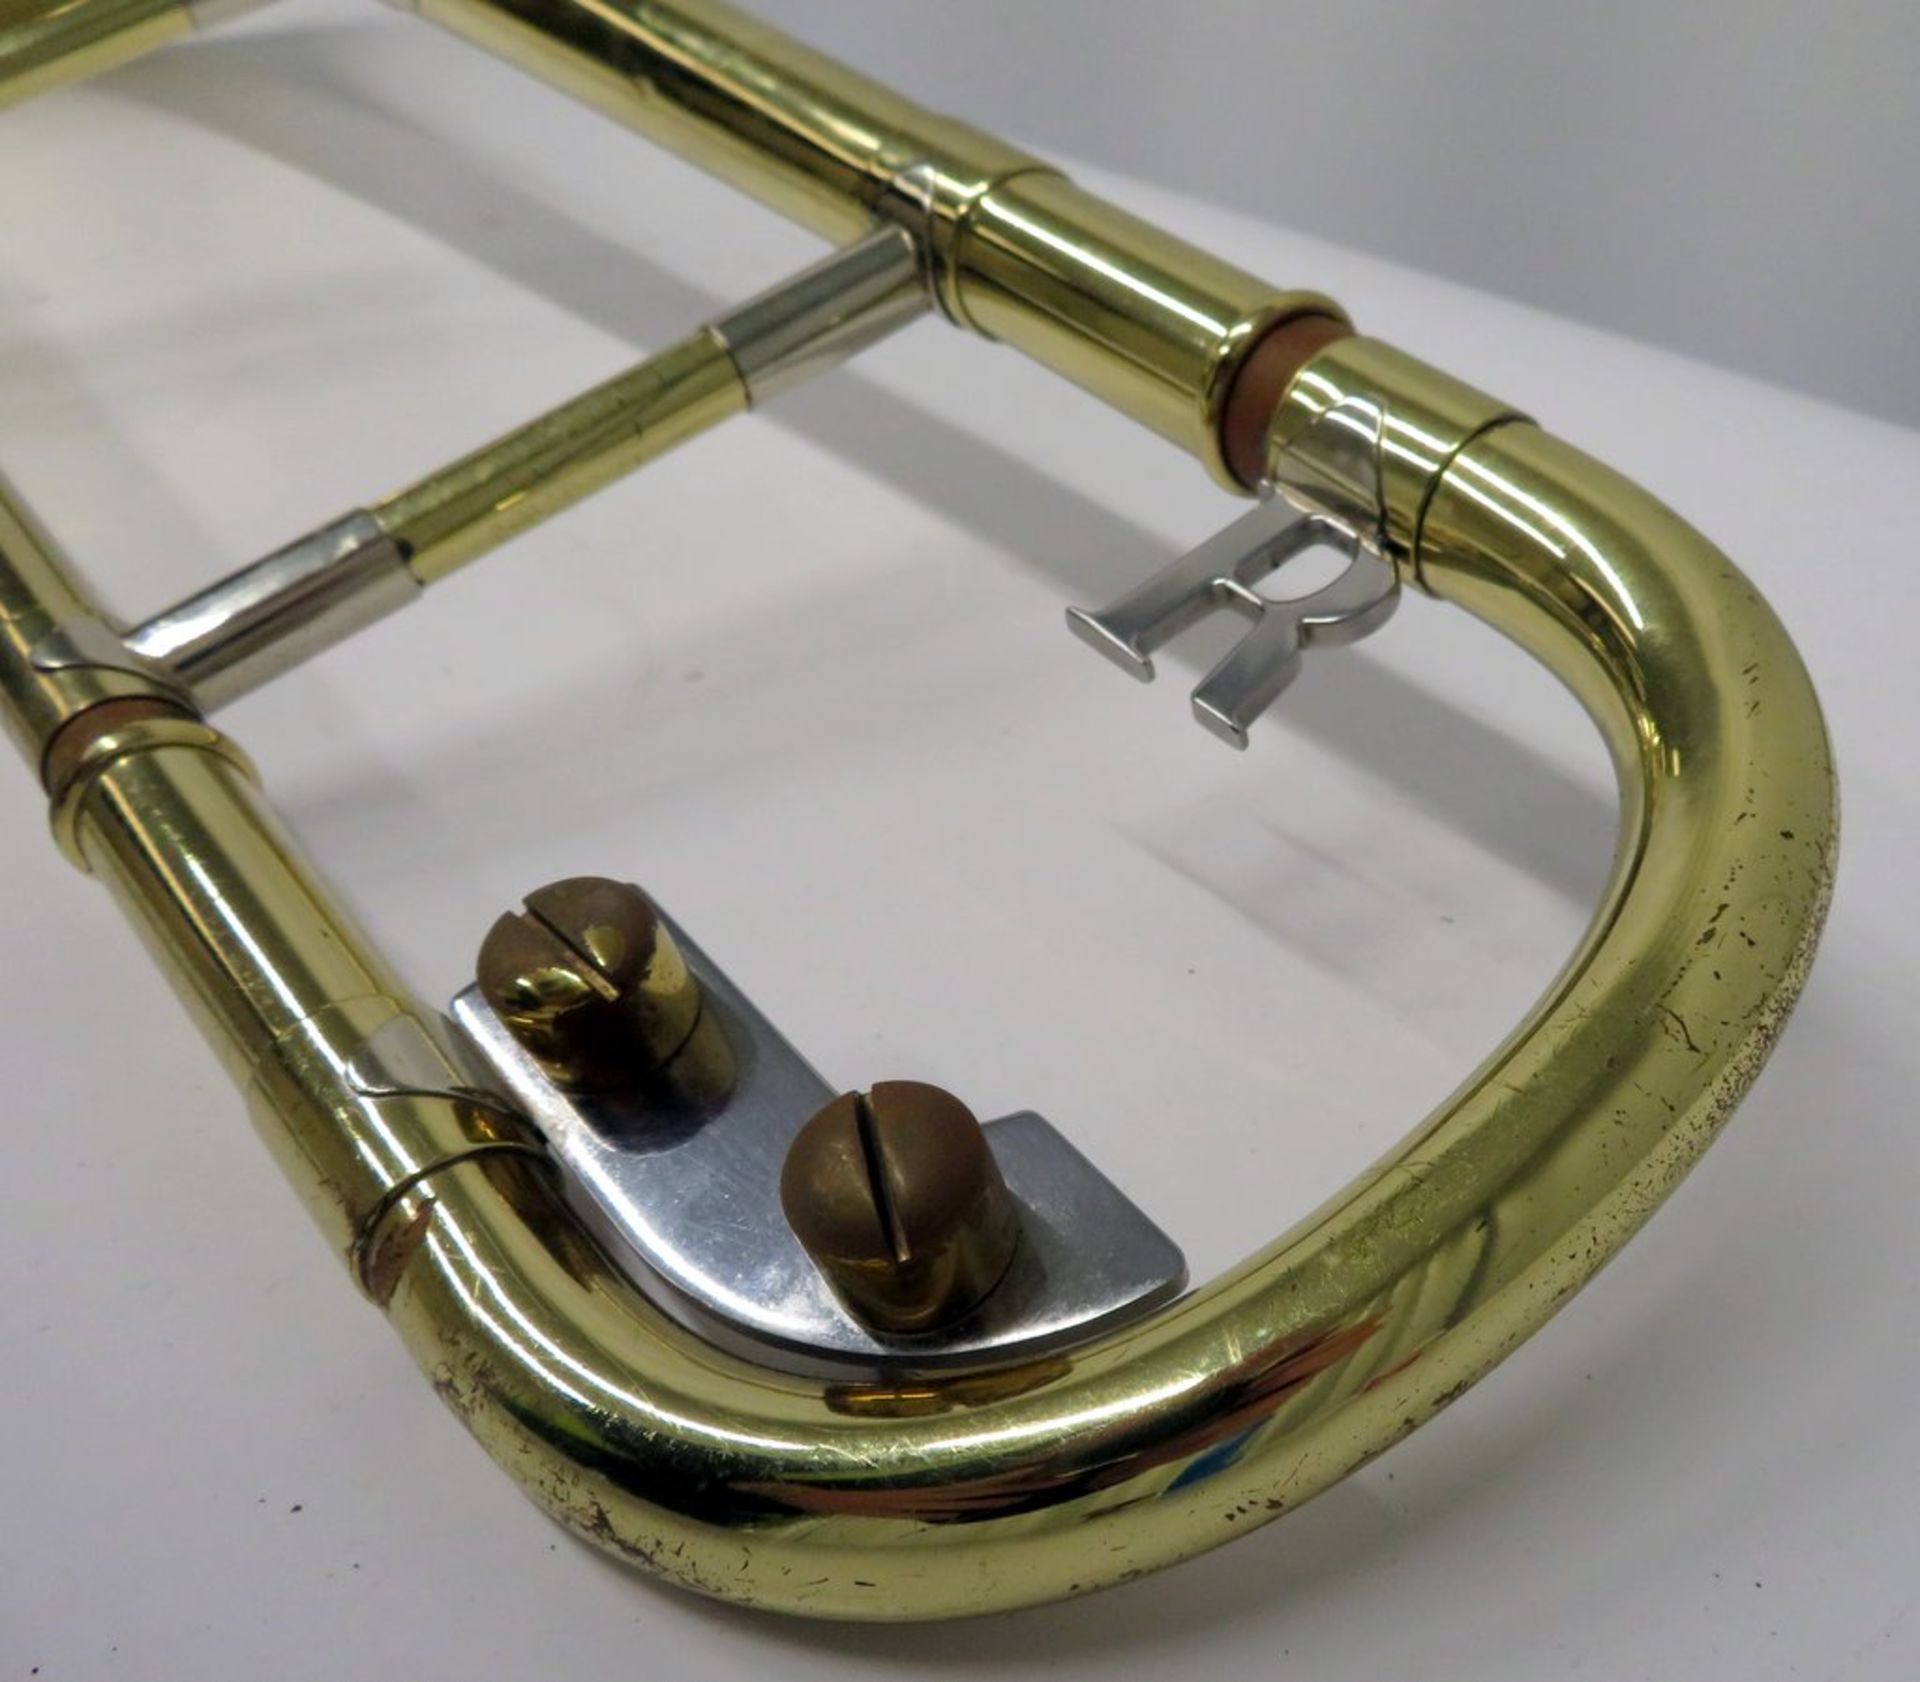 RATH R3 024 Tenor Trombone Complete With Case. - Image 5 of 12